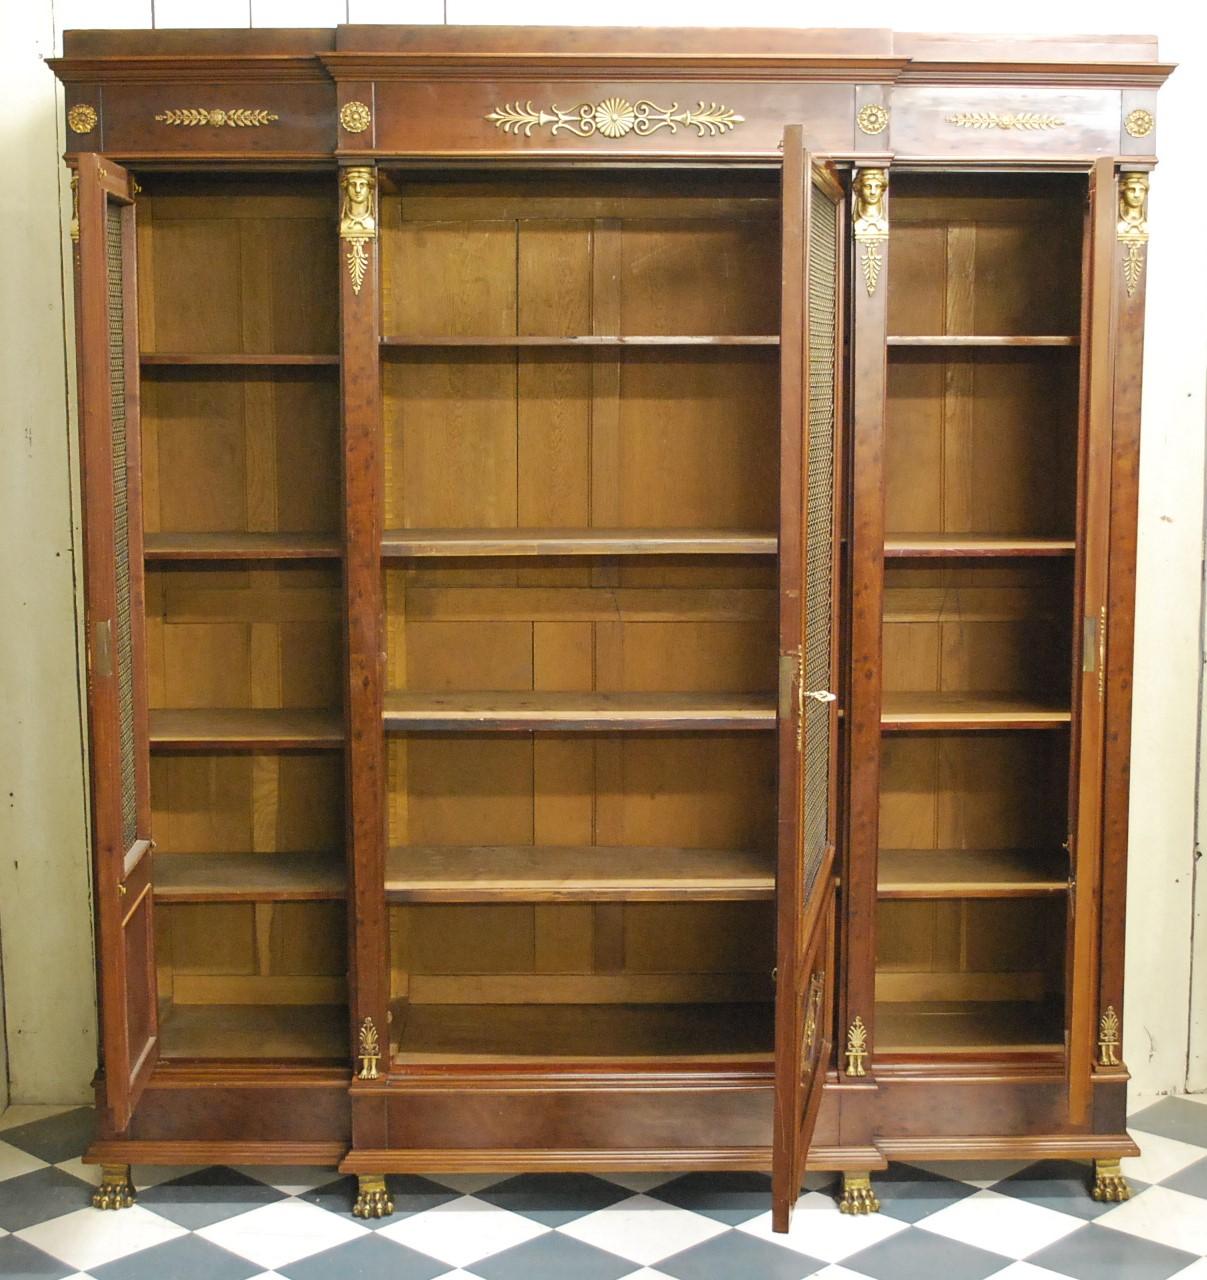 Superb quality French Empire period plum pudding mahogany breakfront bookcase. Standing on gilt paw feet and embellished in classical Egyptian style mounts. Caryatids at the tops of columns with leaves and rosettes on the cornice. The doors are also